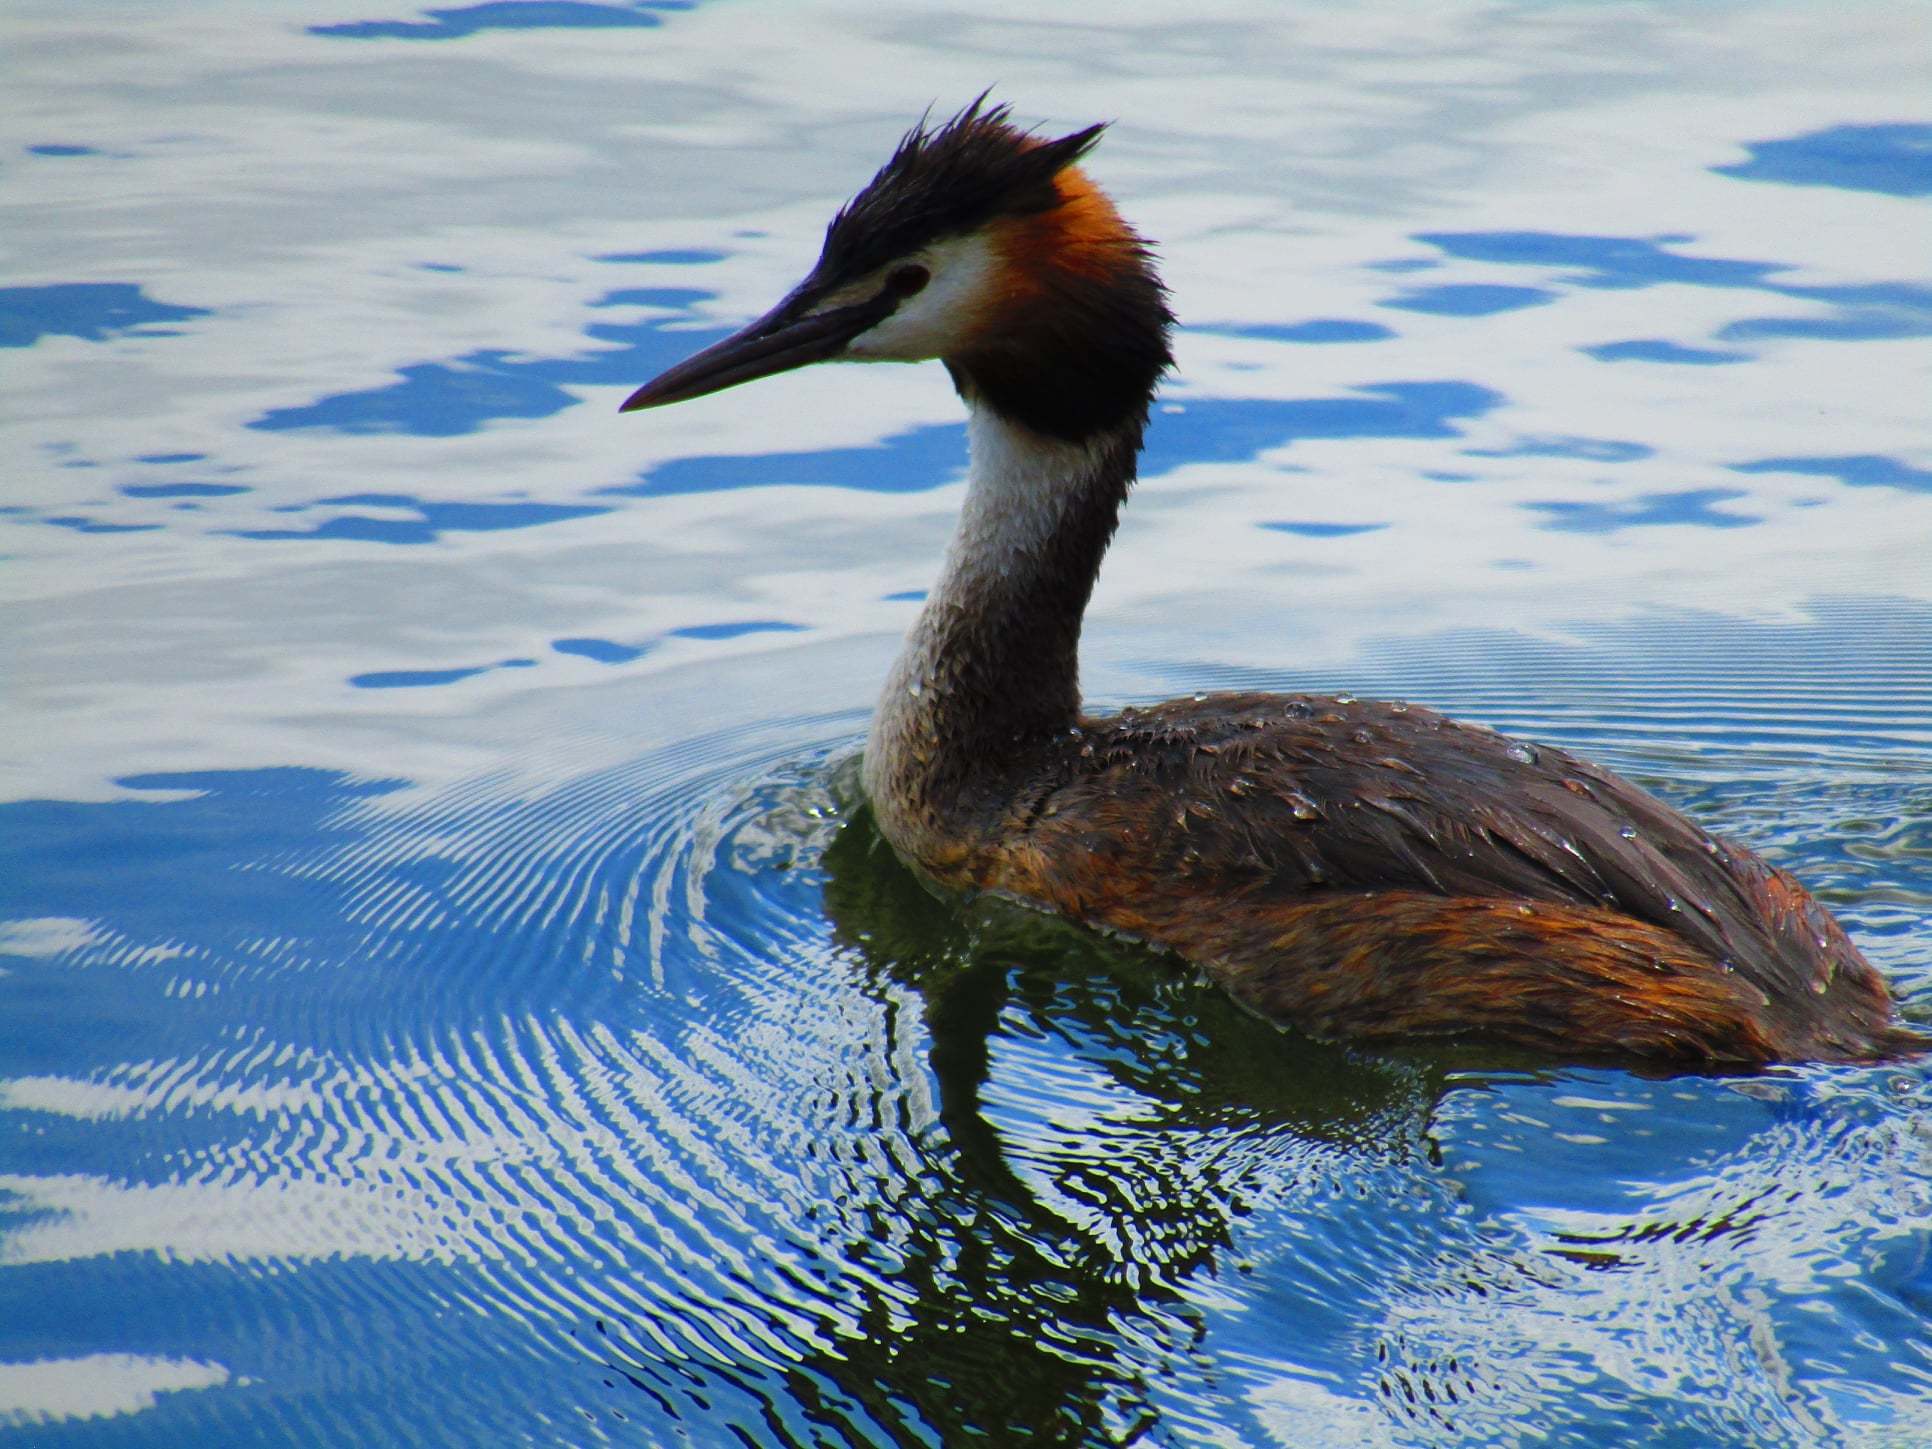 A Great crested grebe just minding its own business (Belinda Smith)